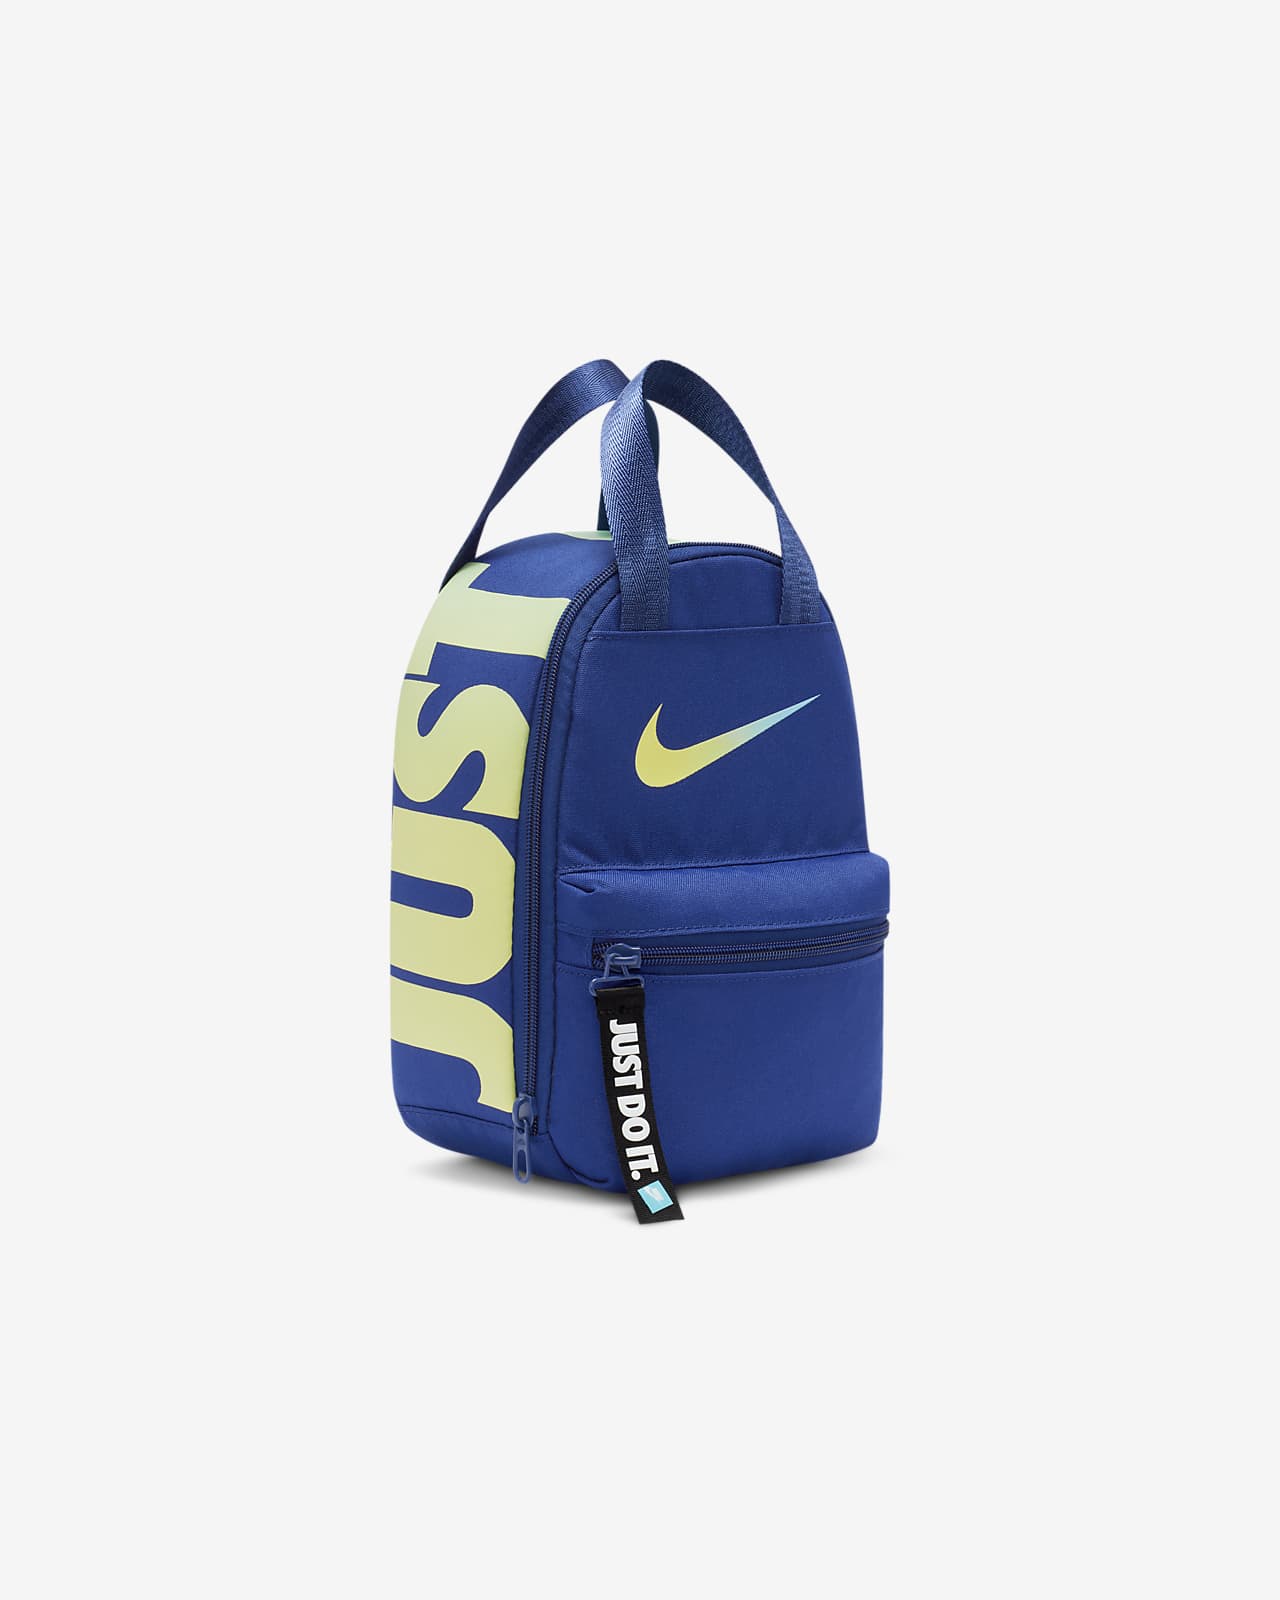 Nike Fuel Pack Lunch Bag